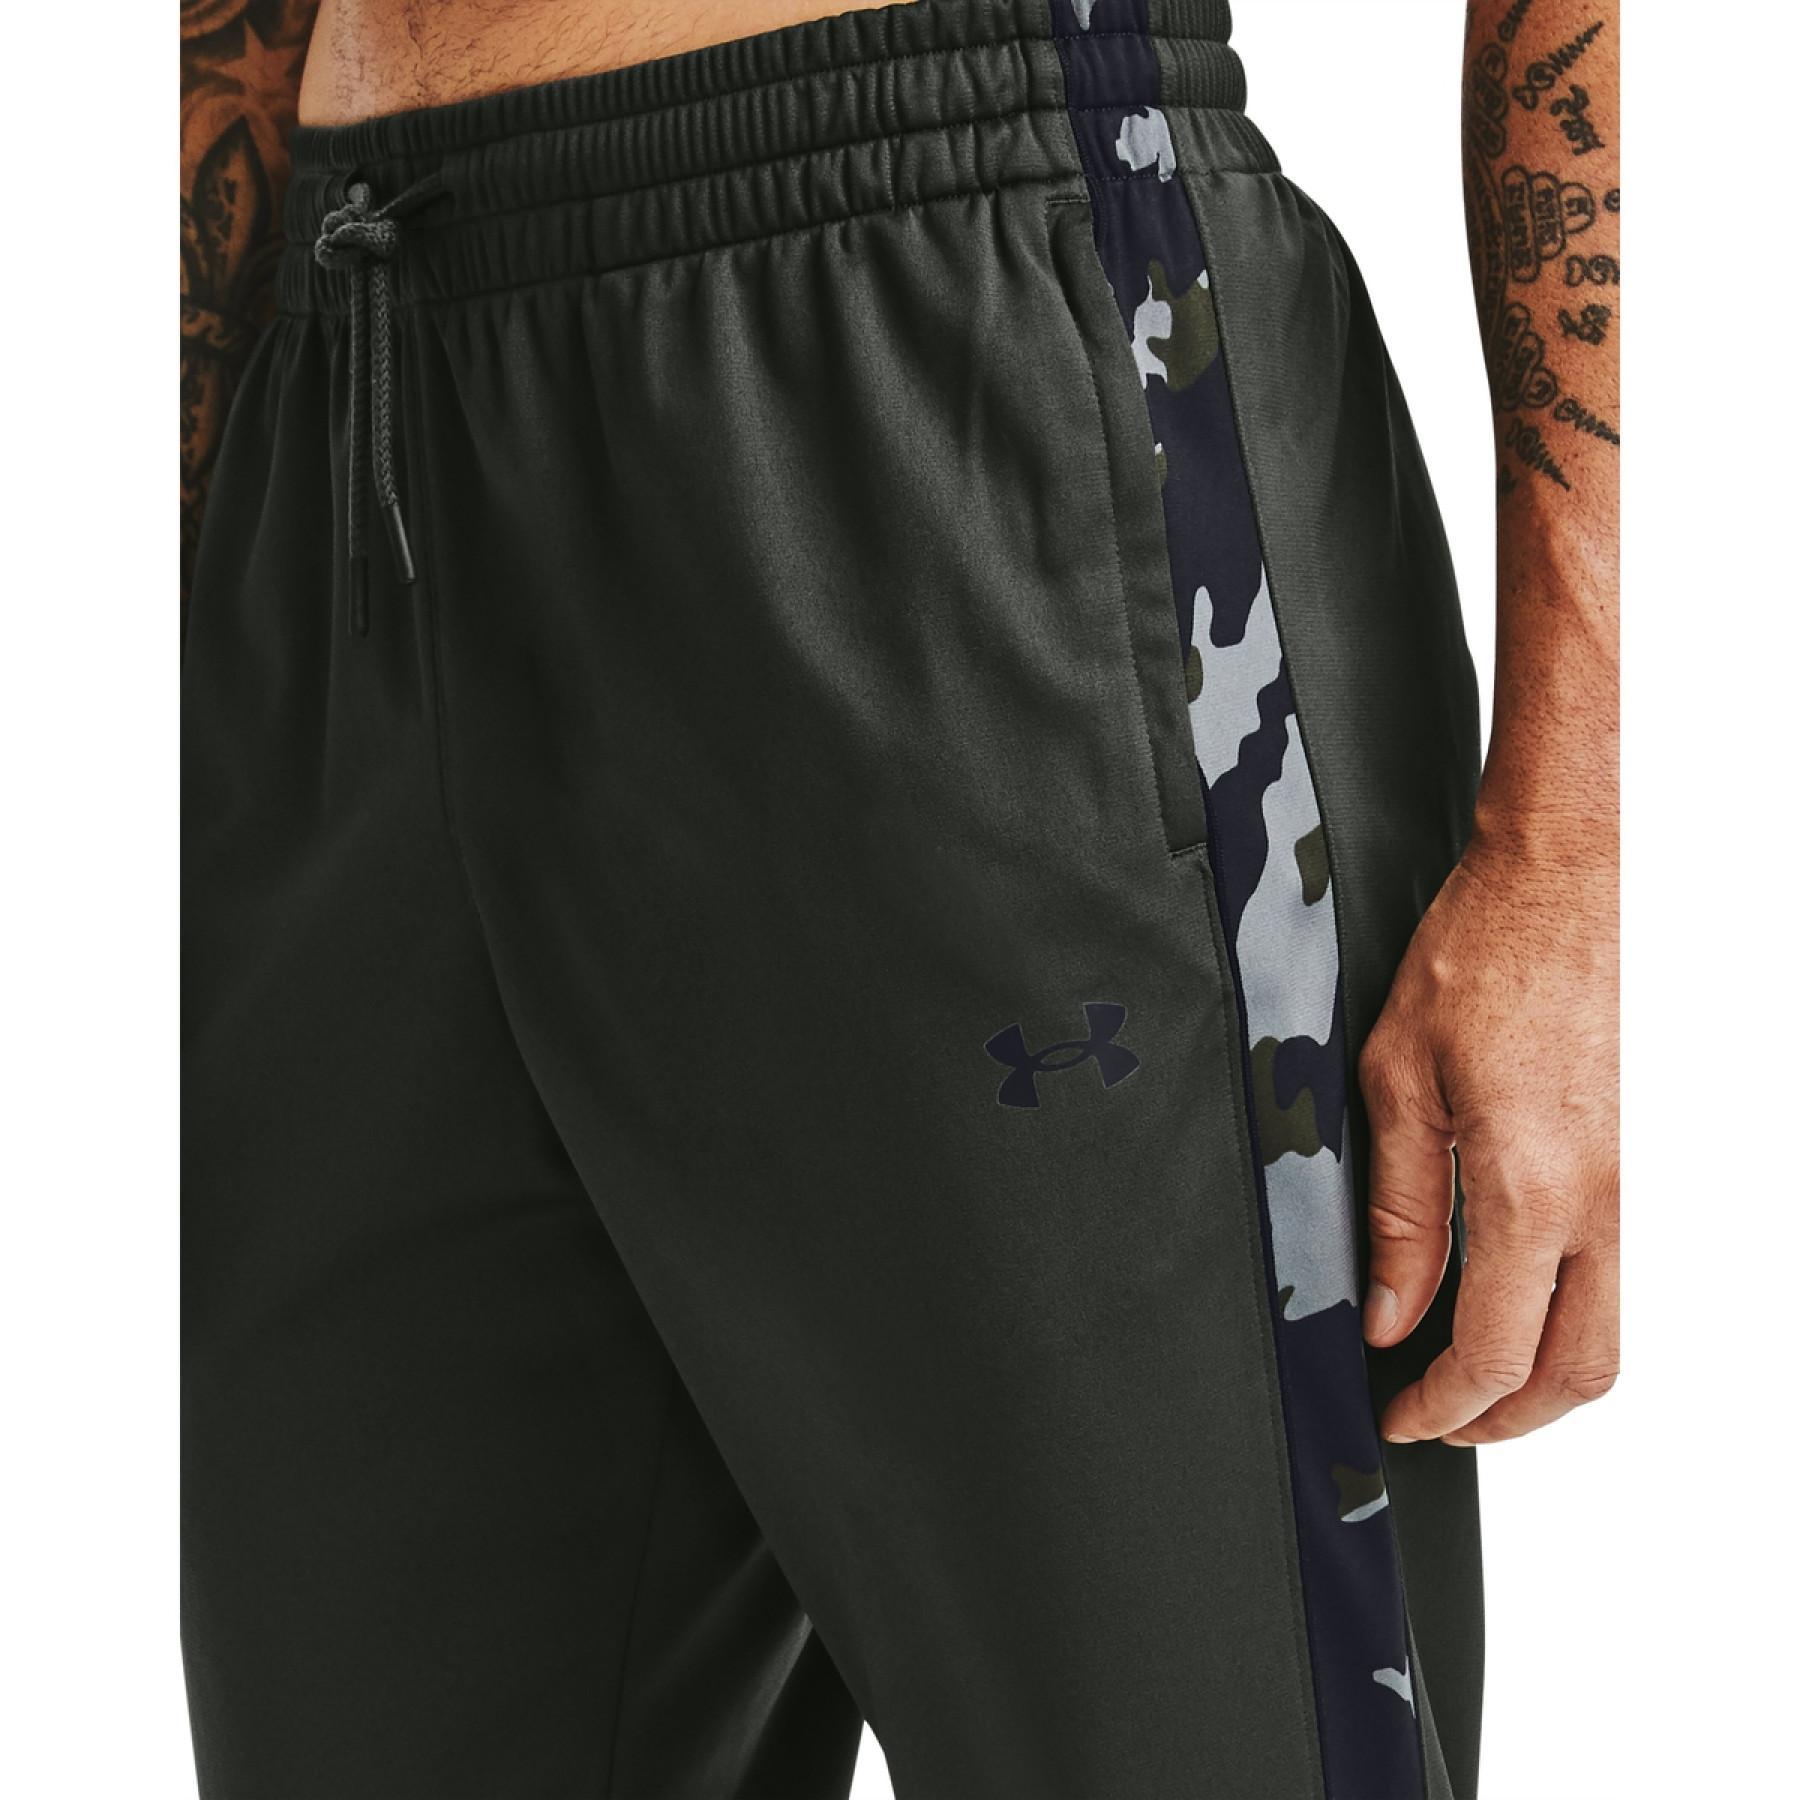 Pants Under Armour Unstoppable Track